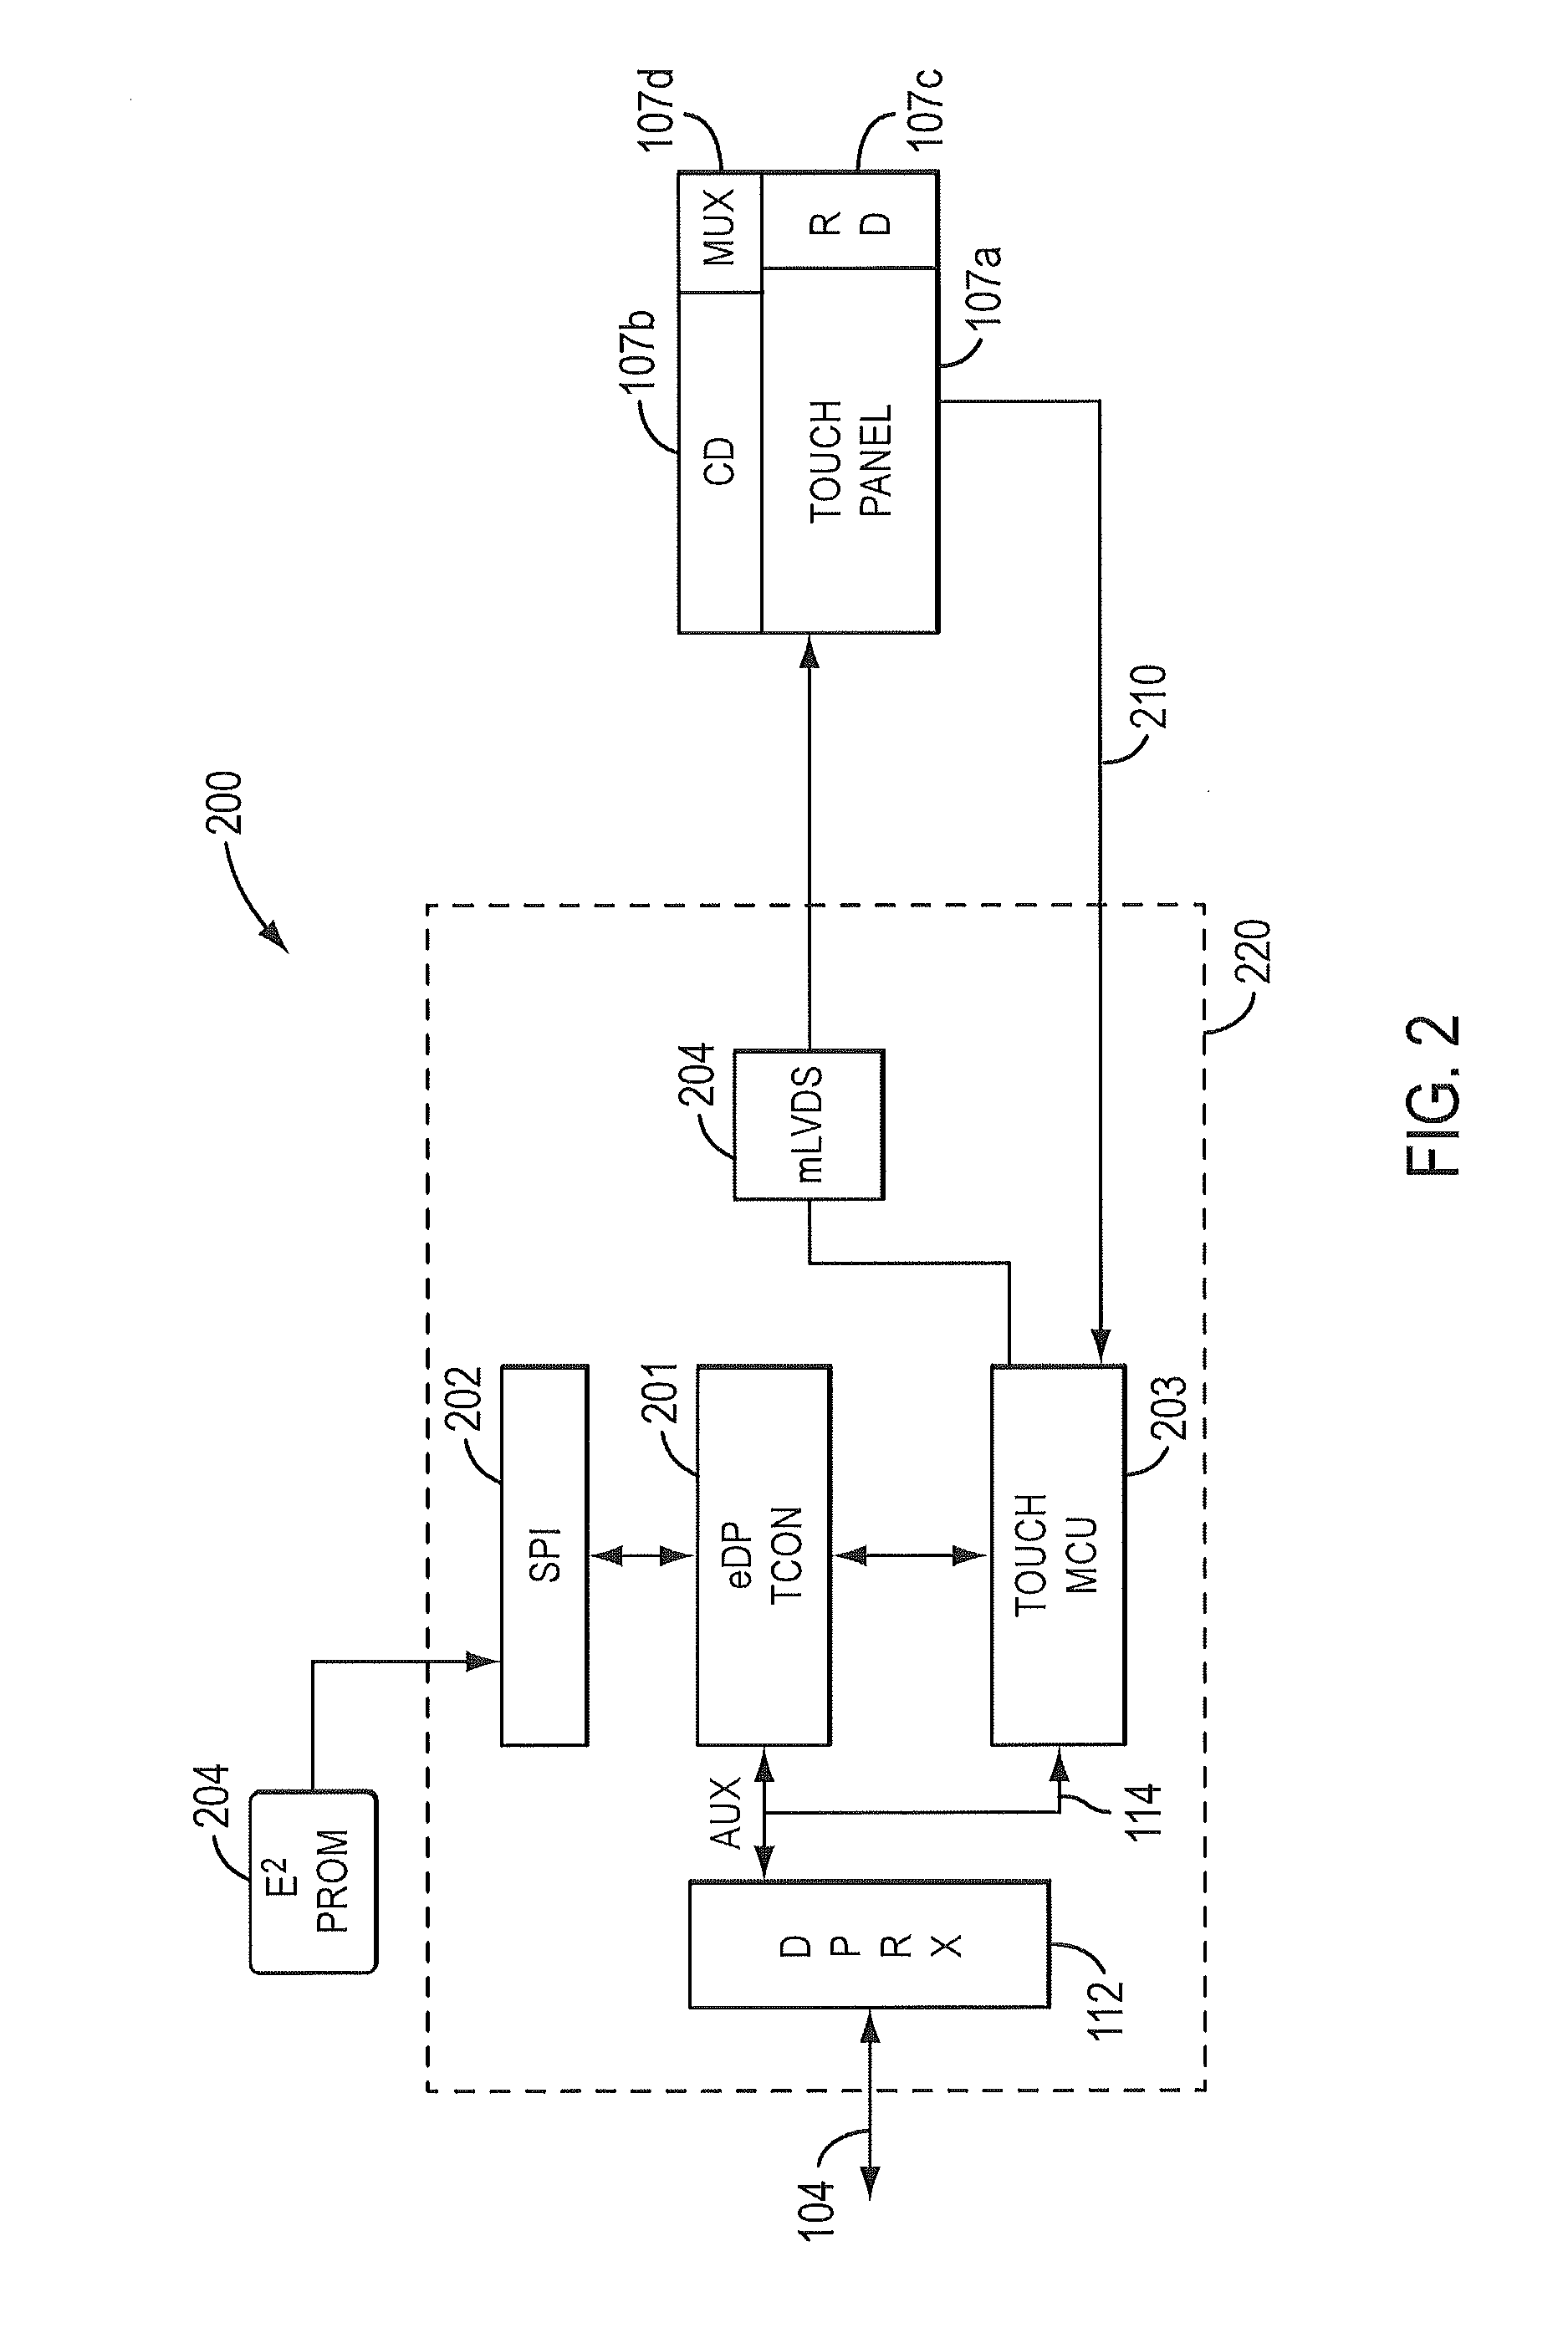 Integrated display and touch system with displayport/embedded displayport interface